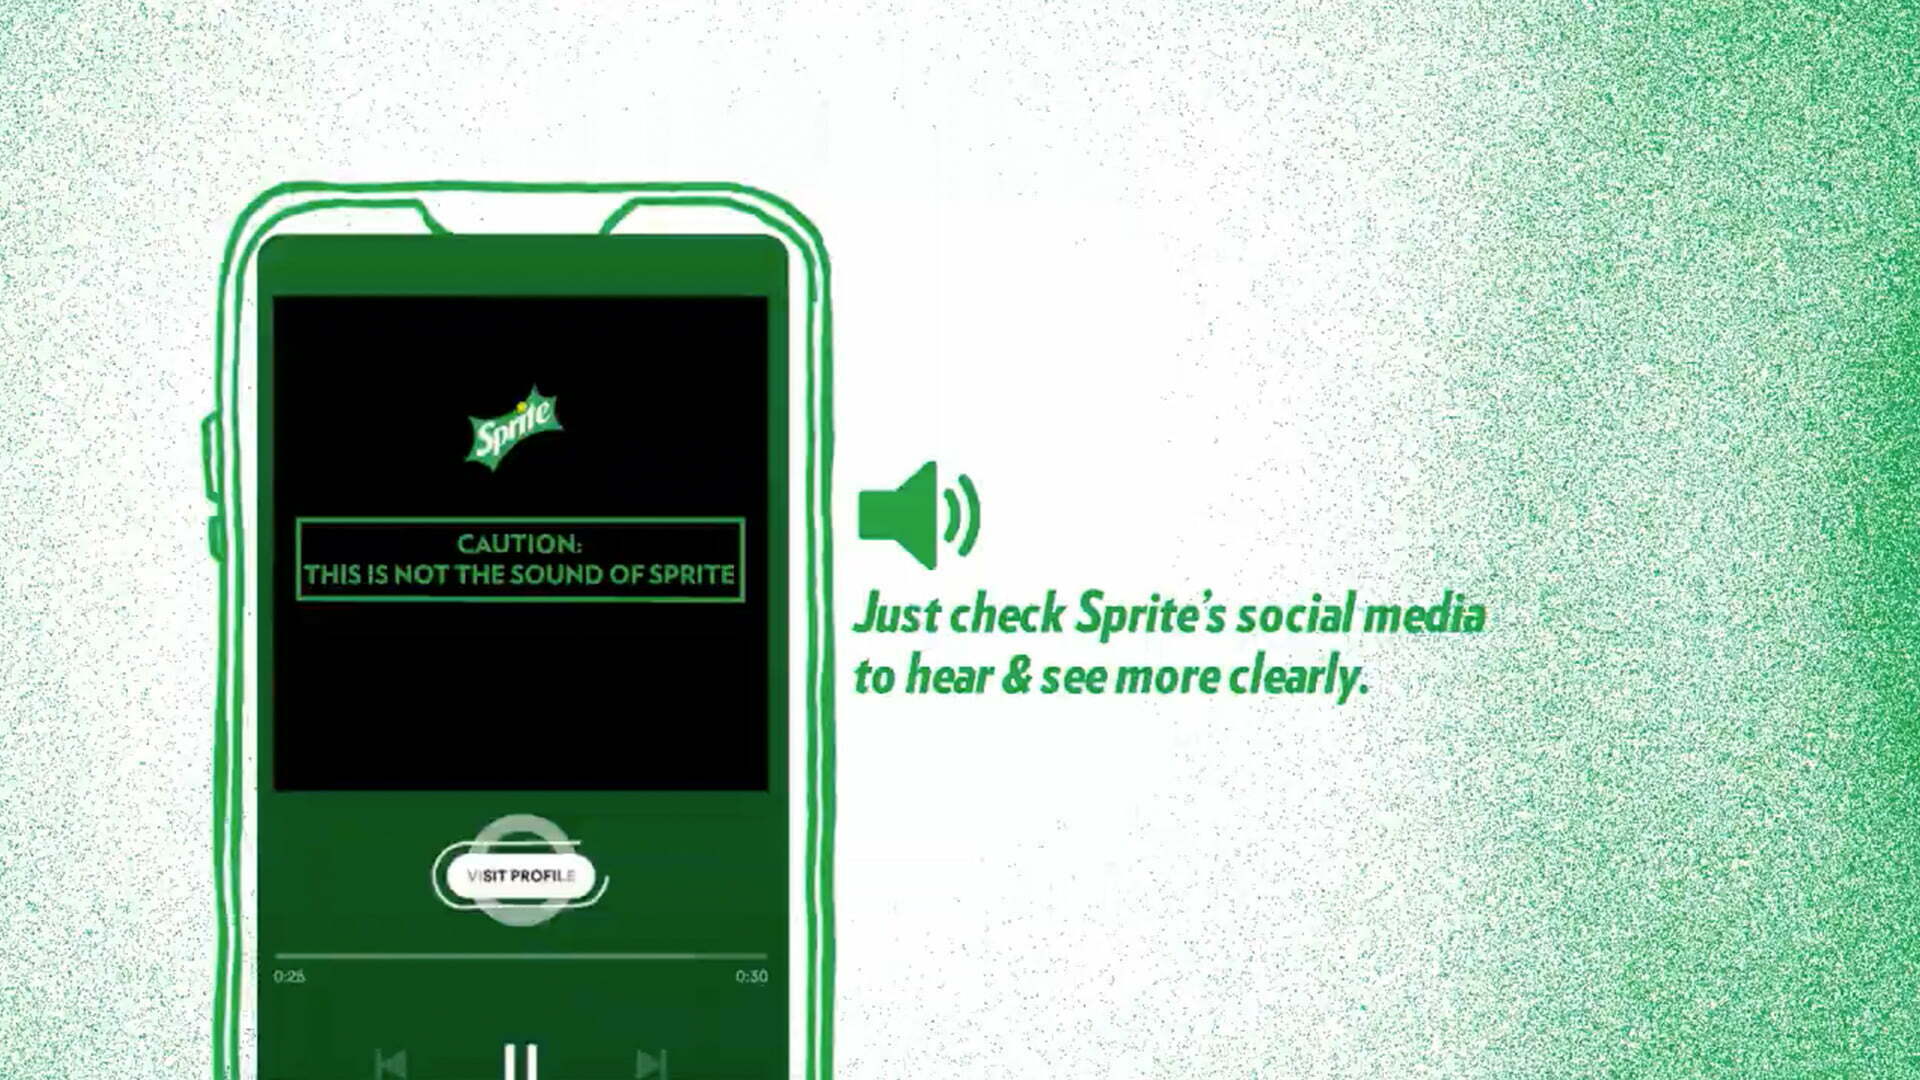 Case Study. These Are Not Sounds of Sprite